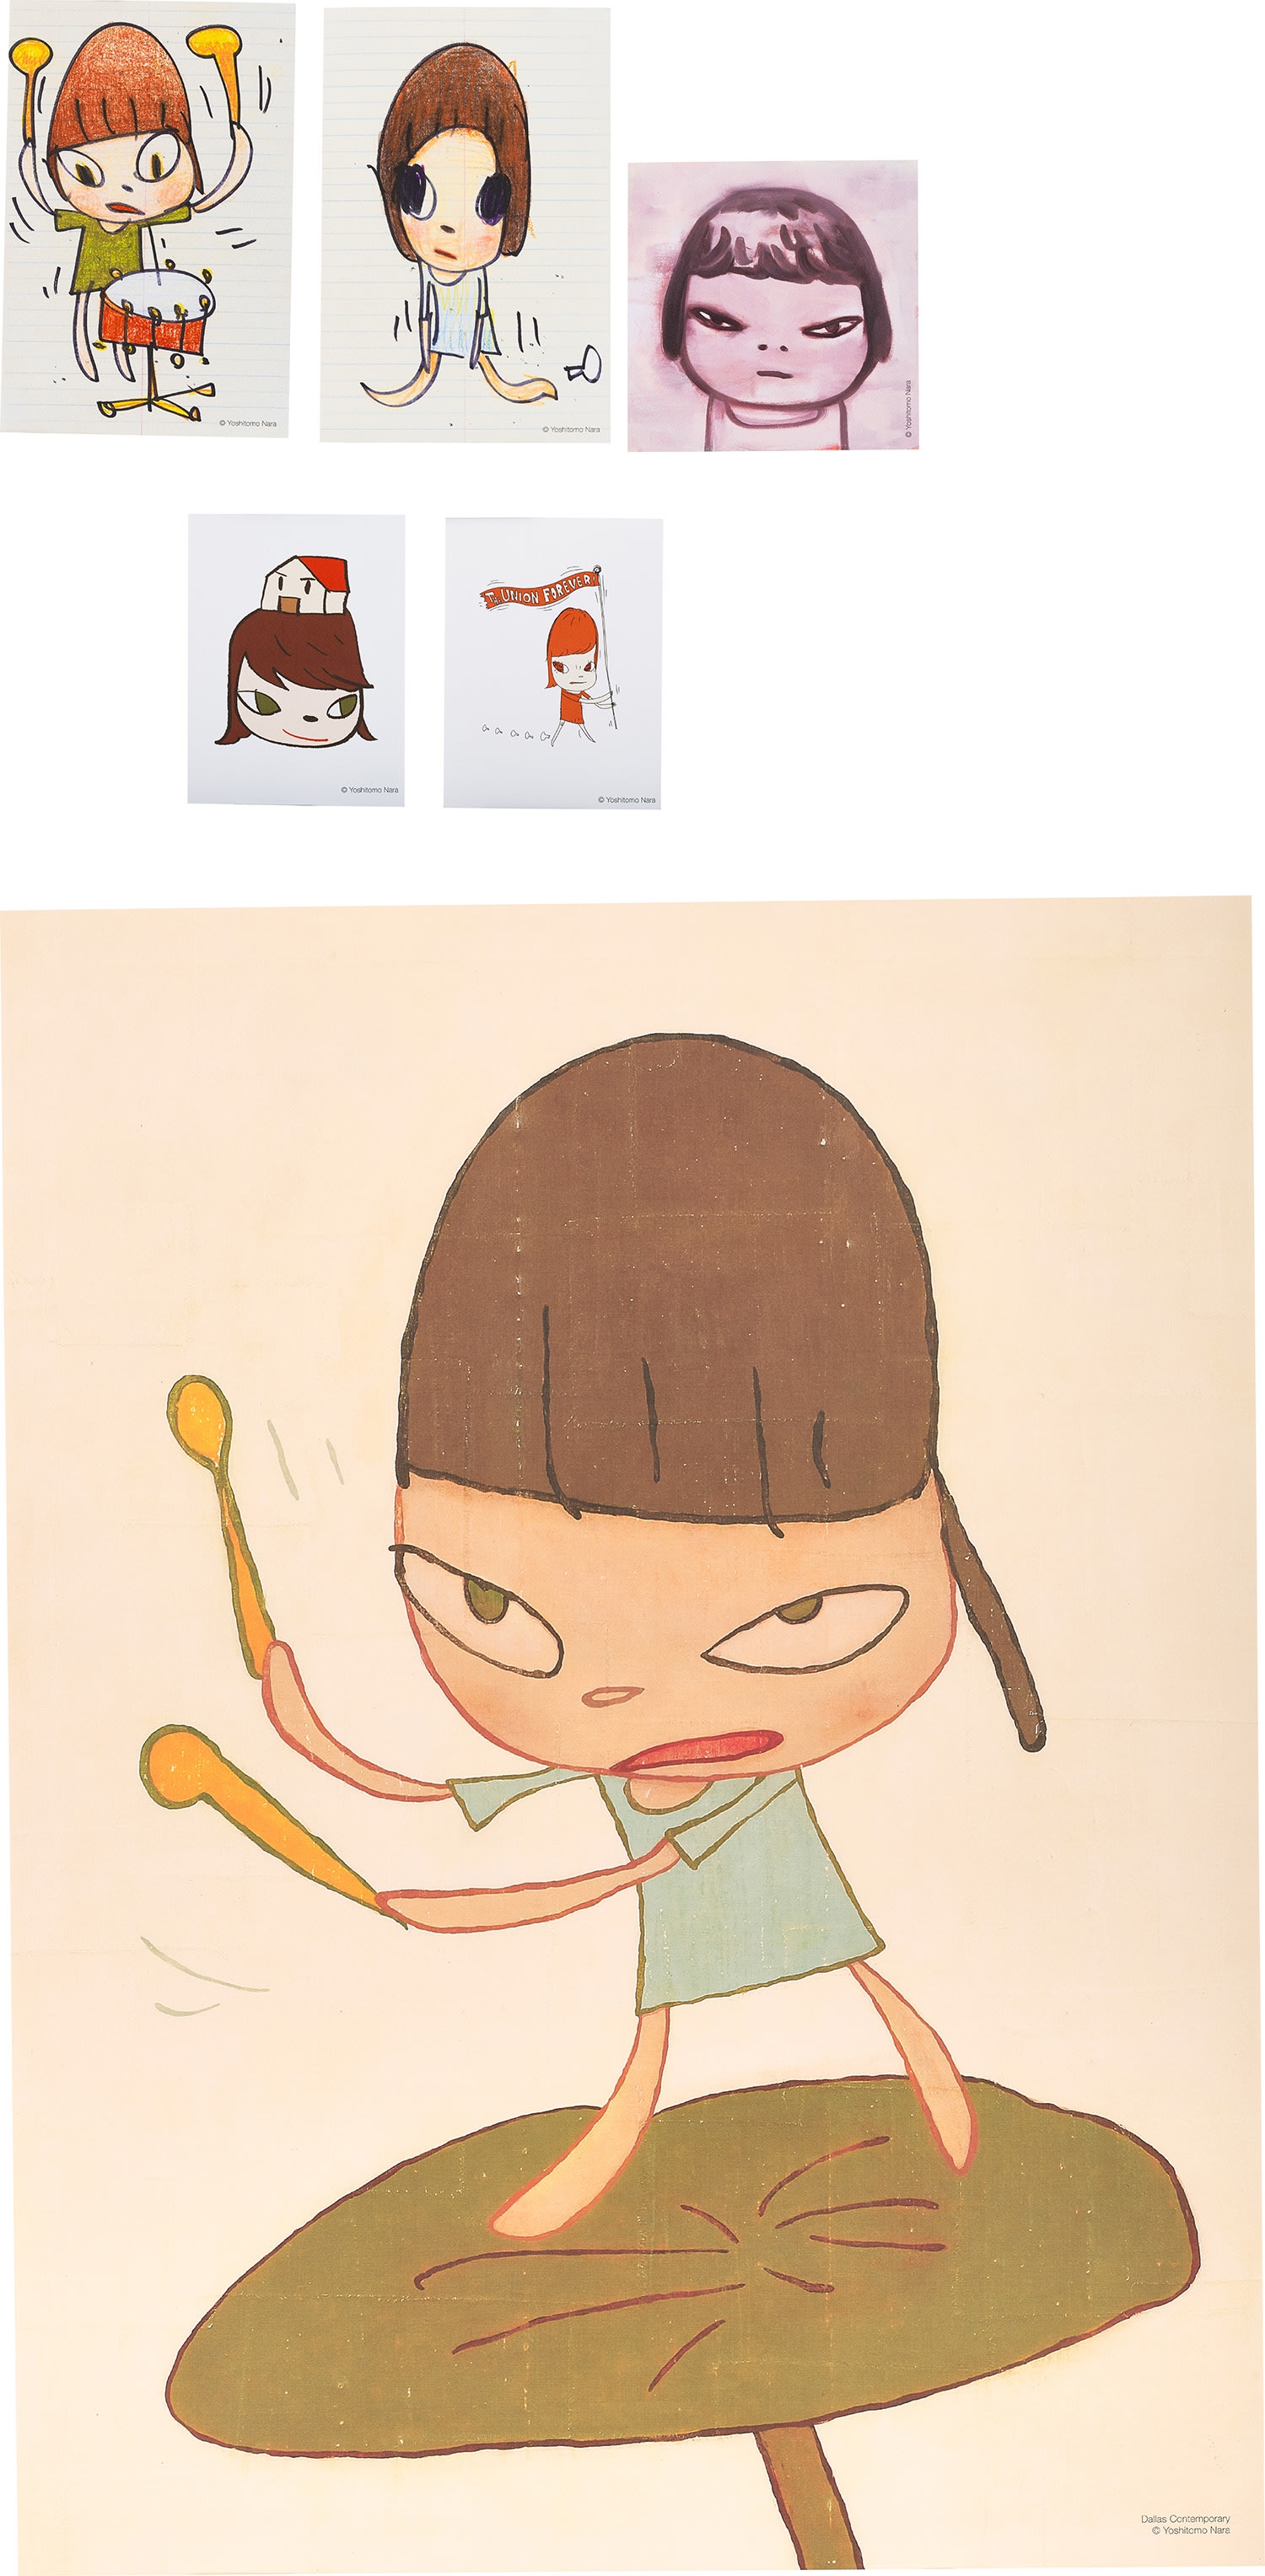 Yoshitomo Nara, Marching on a Butterbur Leaf (Includes 5 Limited Edition  Stickers) (2019), Available for Sale